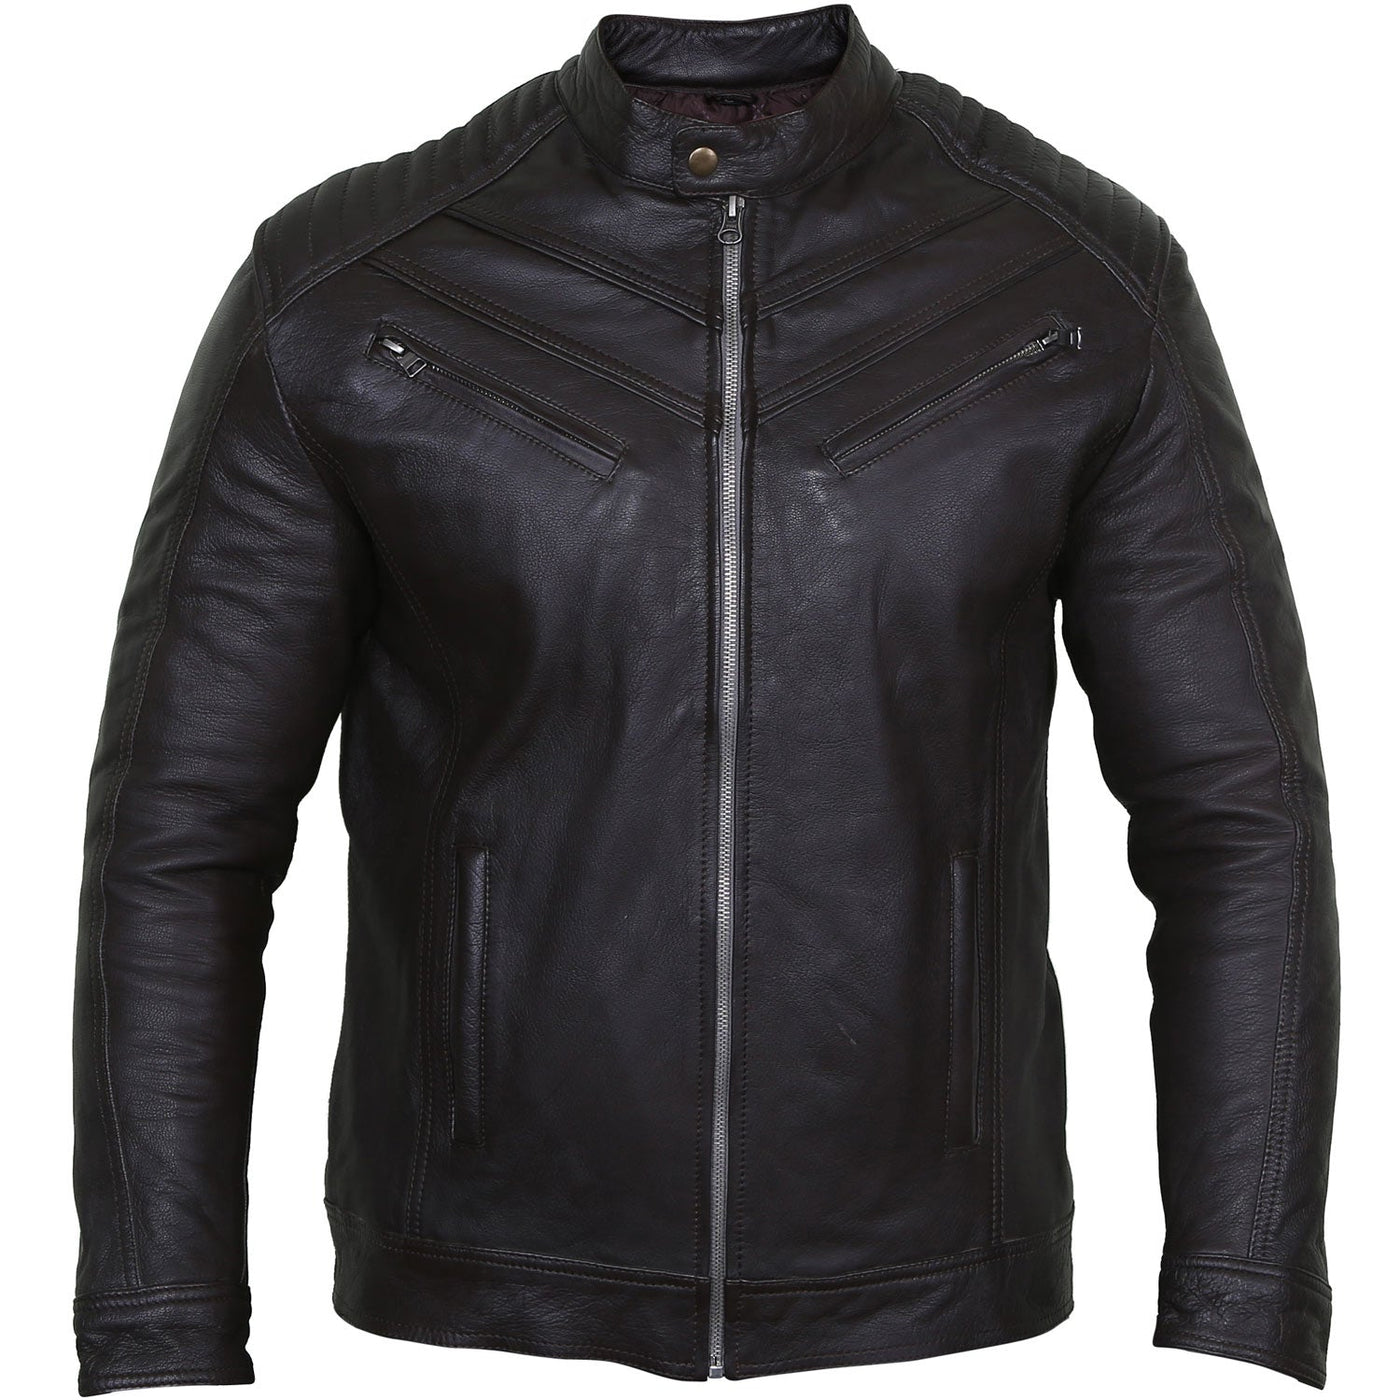 Andrew Black Quilted Leather Biker Jacket Front Pose